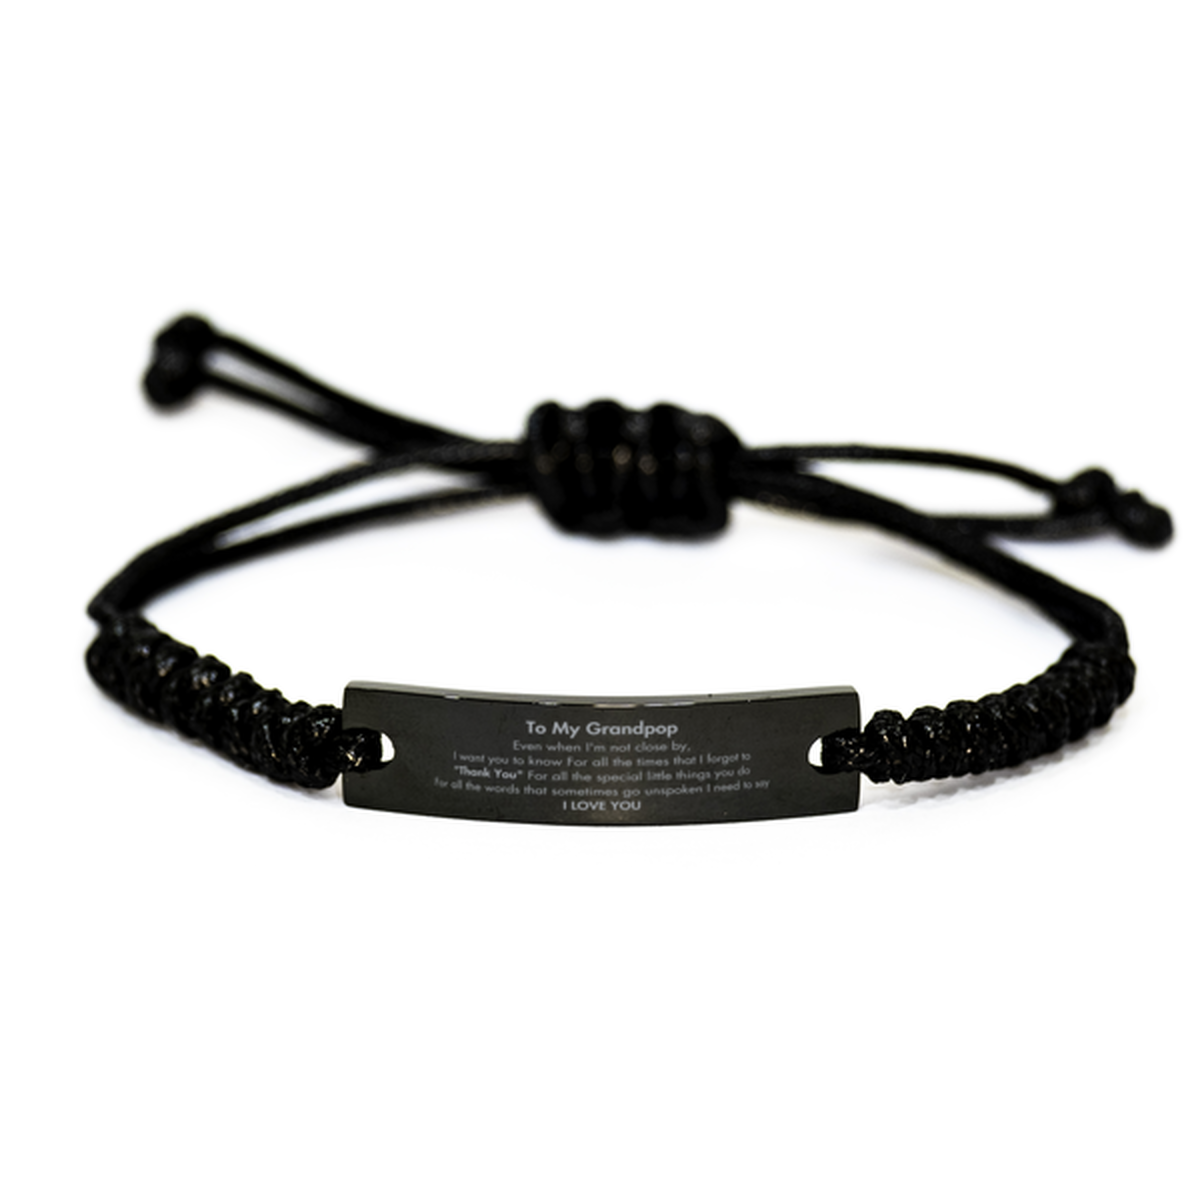 Thank You Gifts for Grandpop, Keepsake Black Rope Bracelet Gifts for Grandpop Birthday Mother's day Father's Day Grandpop For all the words That sometimes go unspoken I need to say I LOVE YOU